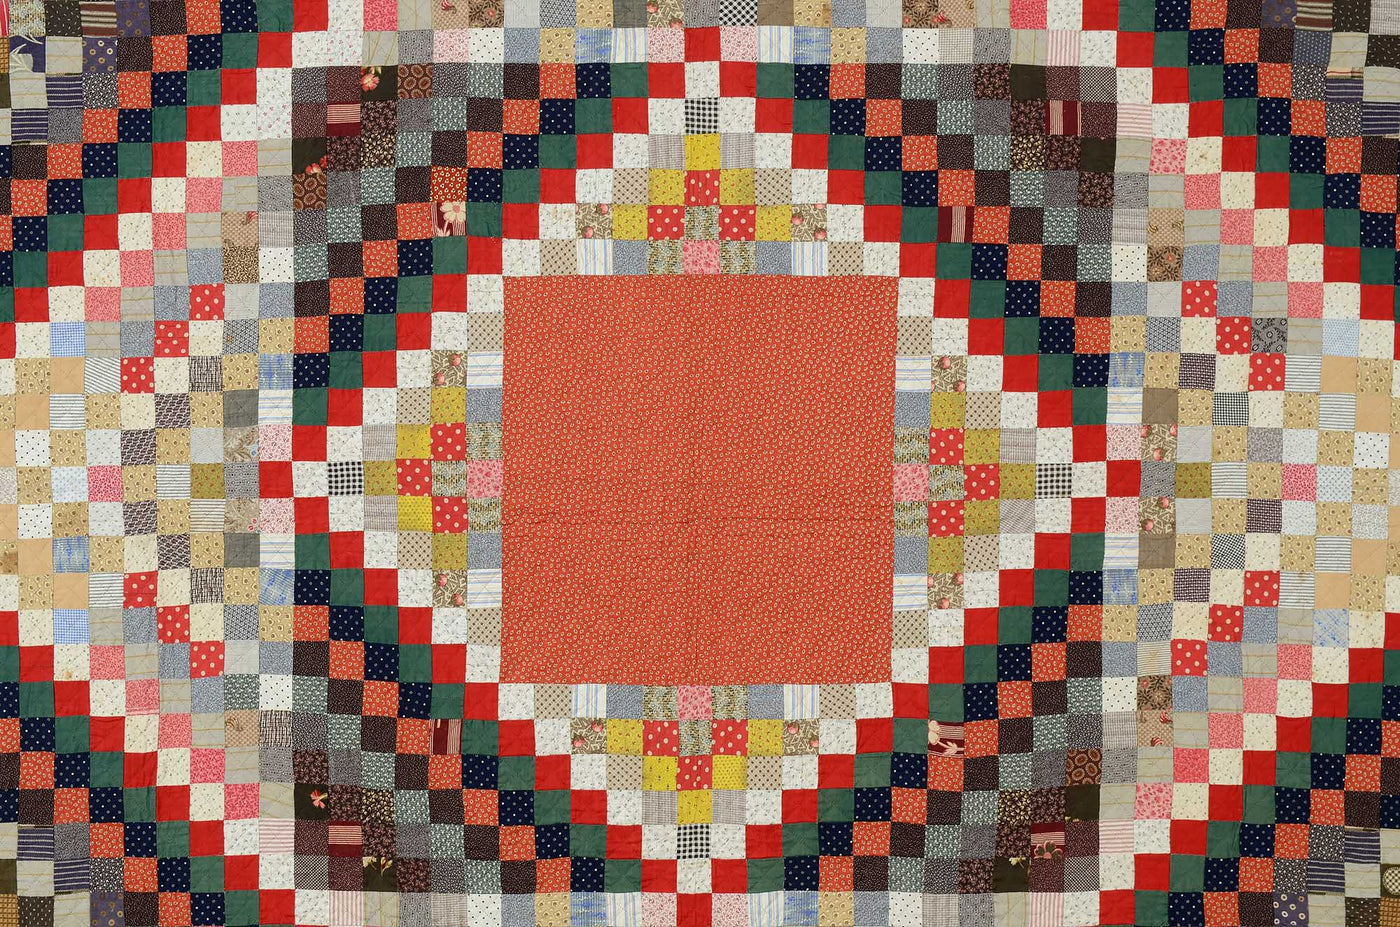 bowmansville-pennsylvania-postage-stamp-quilt-1441605-detail-2_59b12a4e-4aa0-4063-842b-7ce3459fa60a